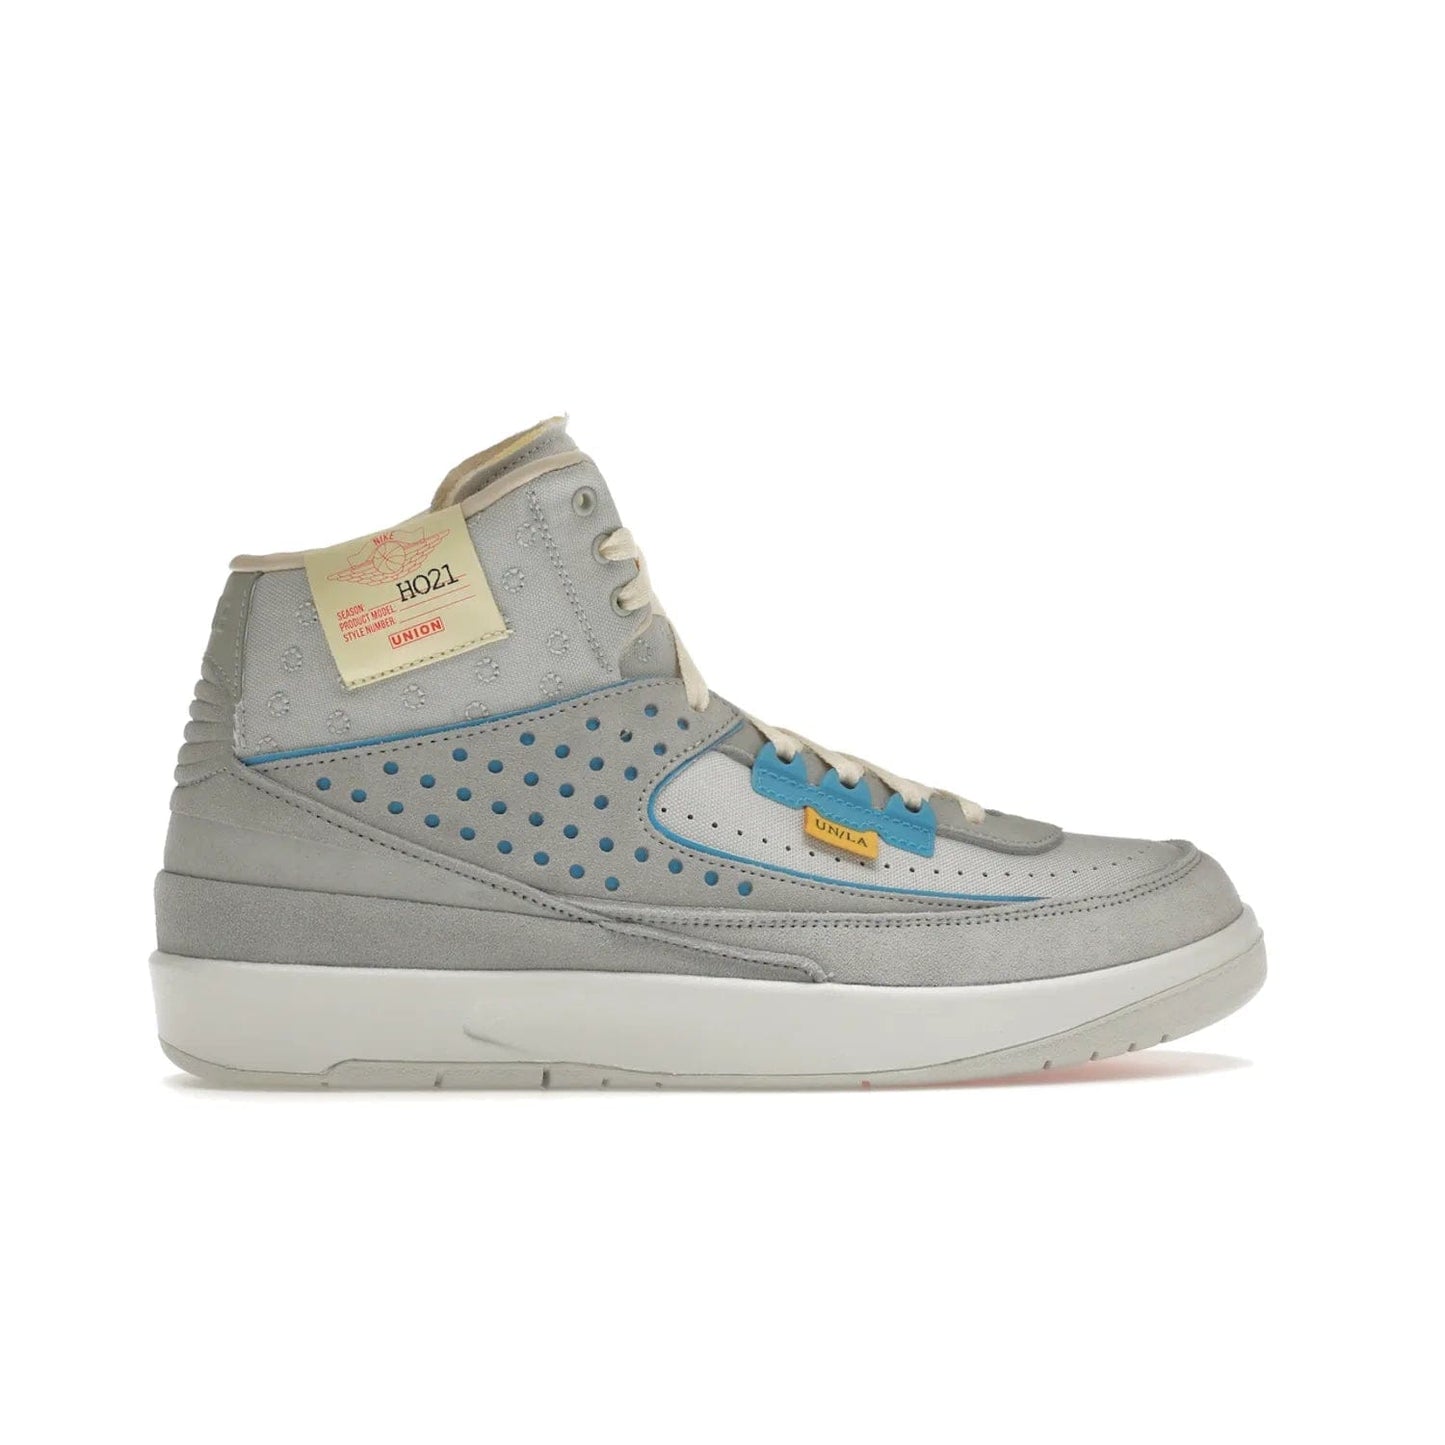 Jordan 2 Retro SP Union Grey Fog - Image 36 - Only at www.BallersClubKickz.com - Introducing the Air Jordan 2 Retro SP Union Grey Fog. This intricate sneaker design features a grey canvas upper with light blue eyelets, eyestay patches, and piping, plus custom external tags. Dropping in April 2022, this exclusive release offers a worn-in look and feel.